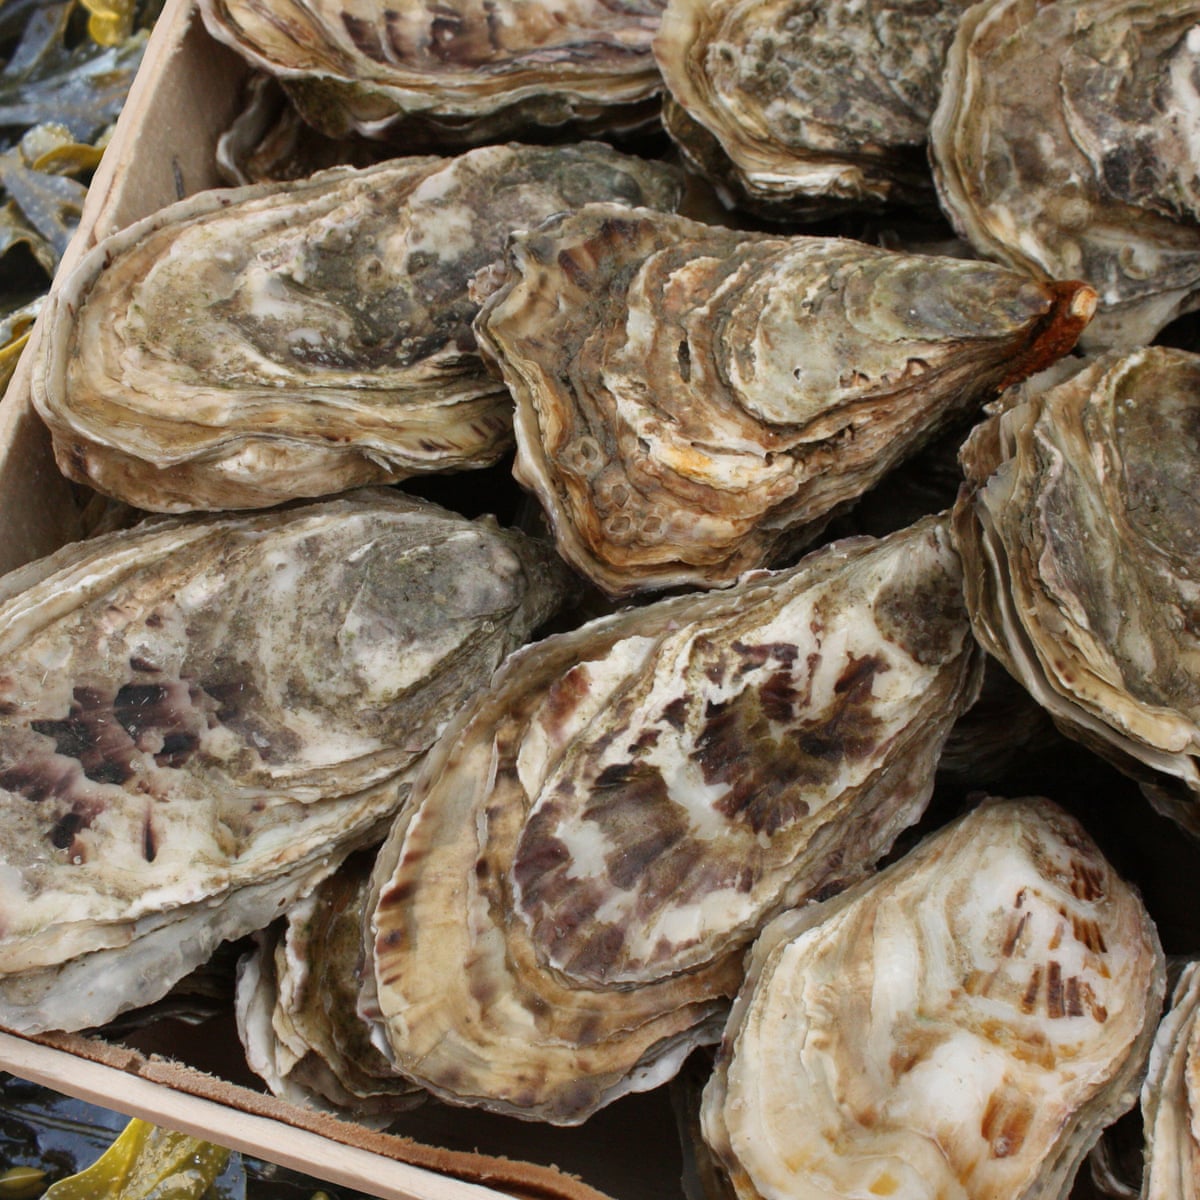 Moonlight influences opening and closing of oysters' shells 